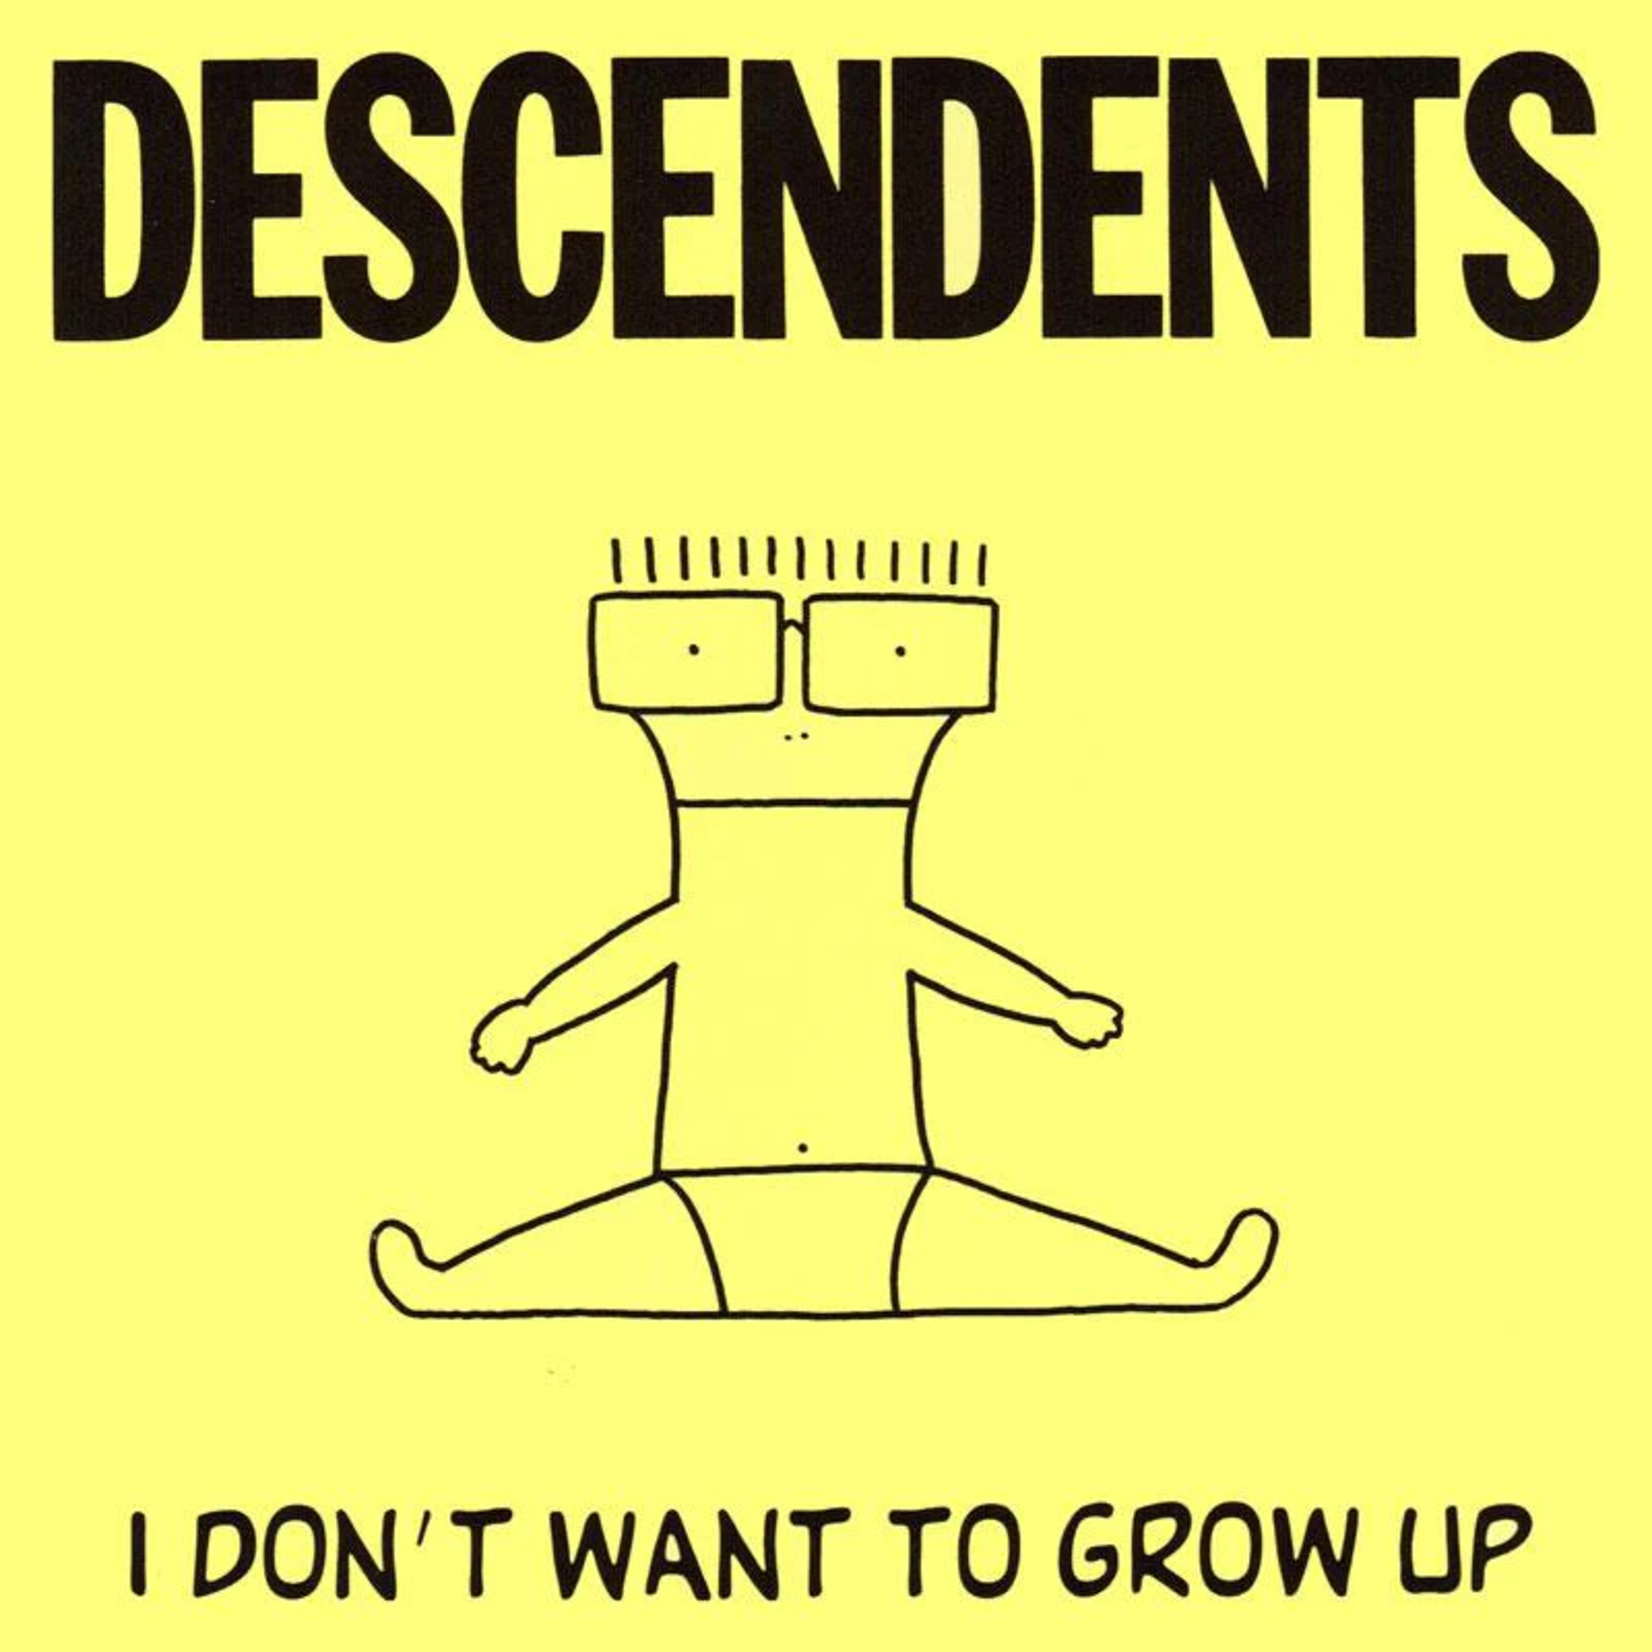 SST Descendents I Don't Want To Grow Up (Sticker)